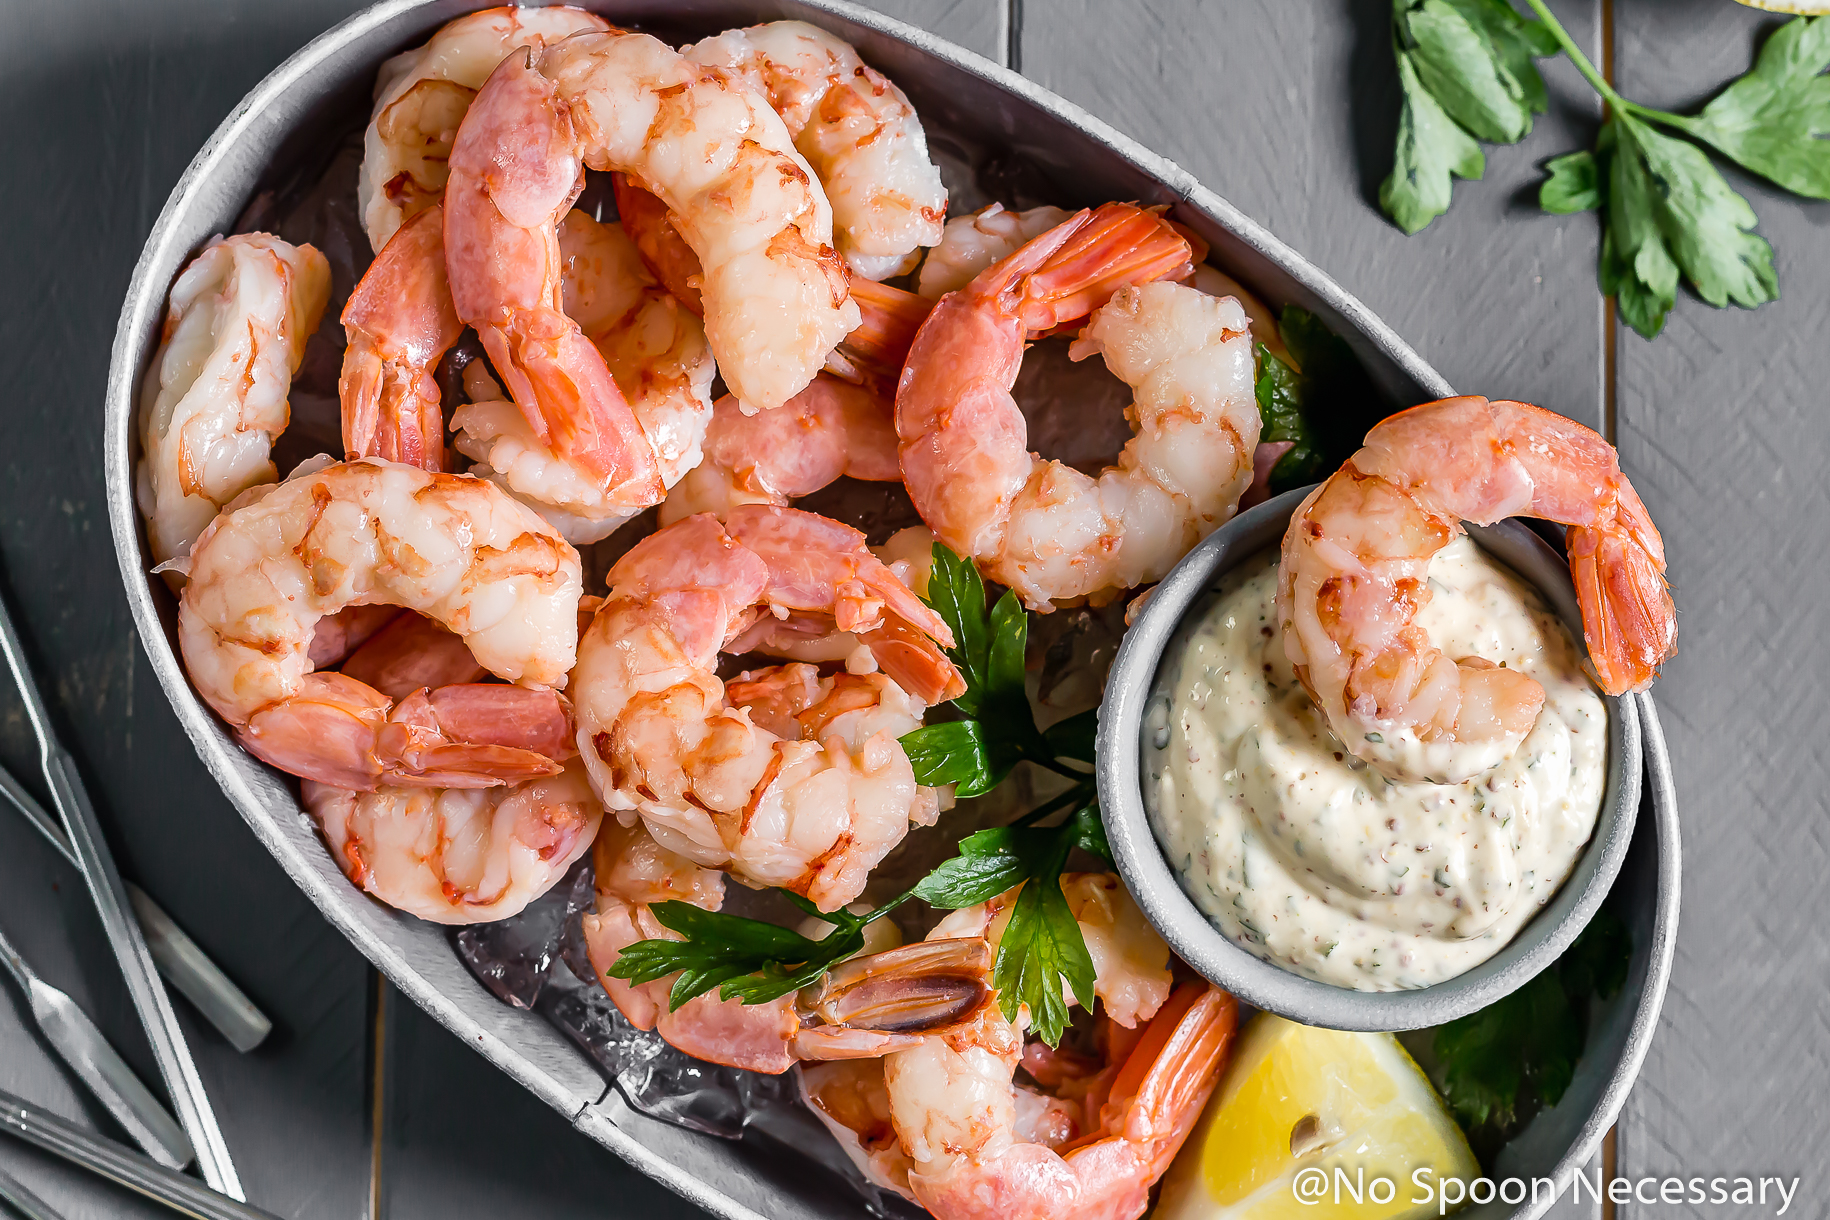 Shrimp Market Price 2021-2026: Global Size, Share, Value, Trends, Growth, Outlook, and Future Forecast Report